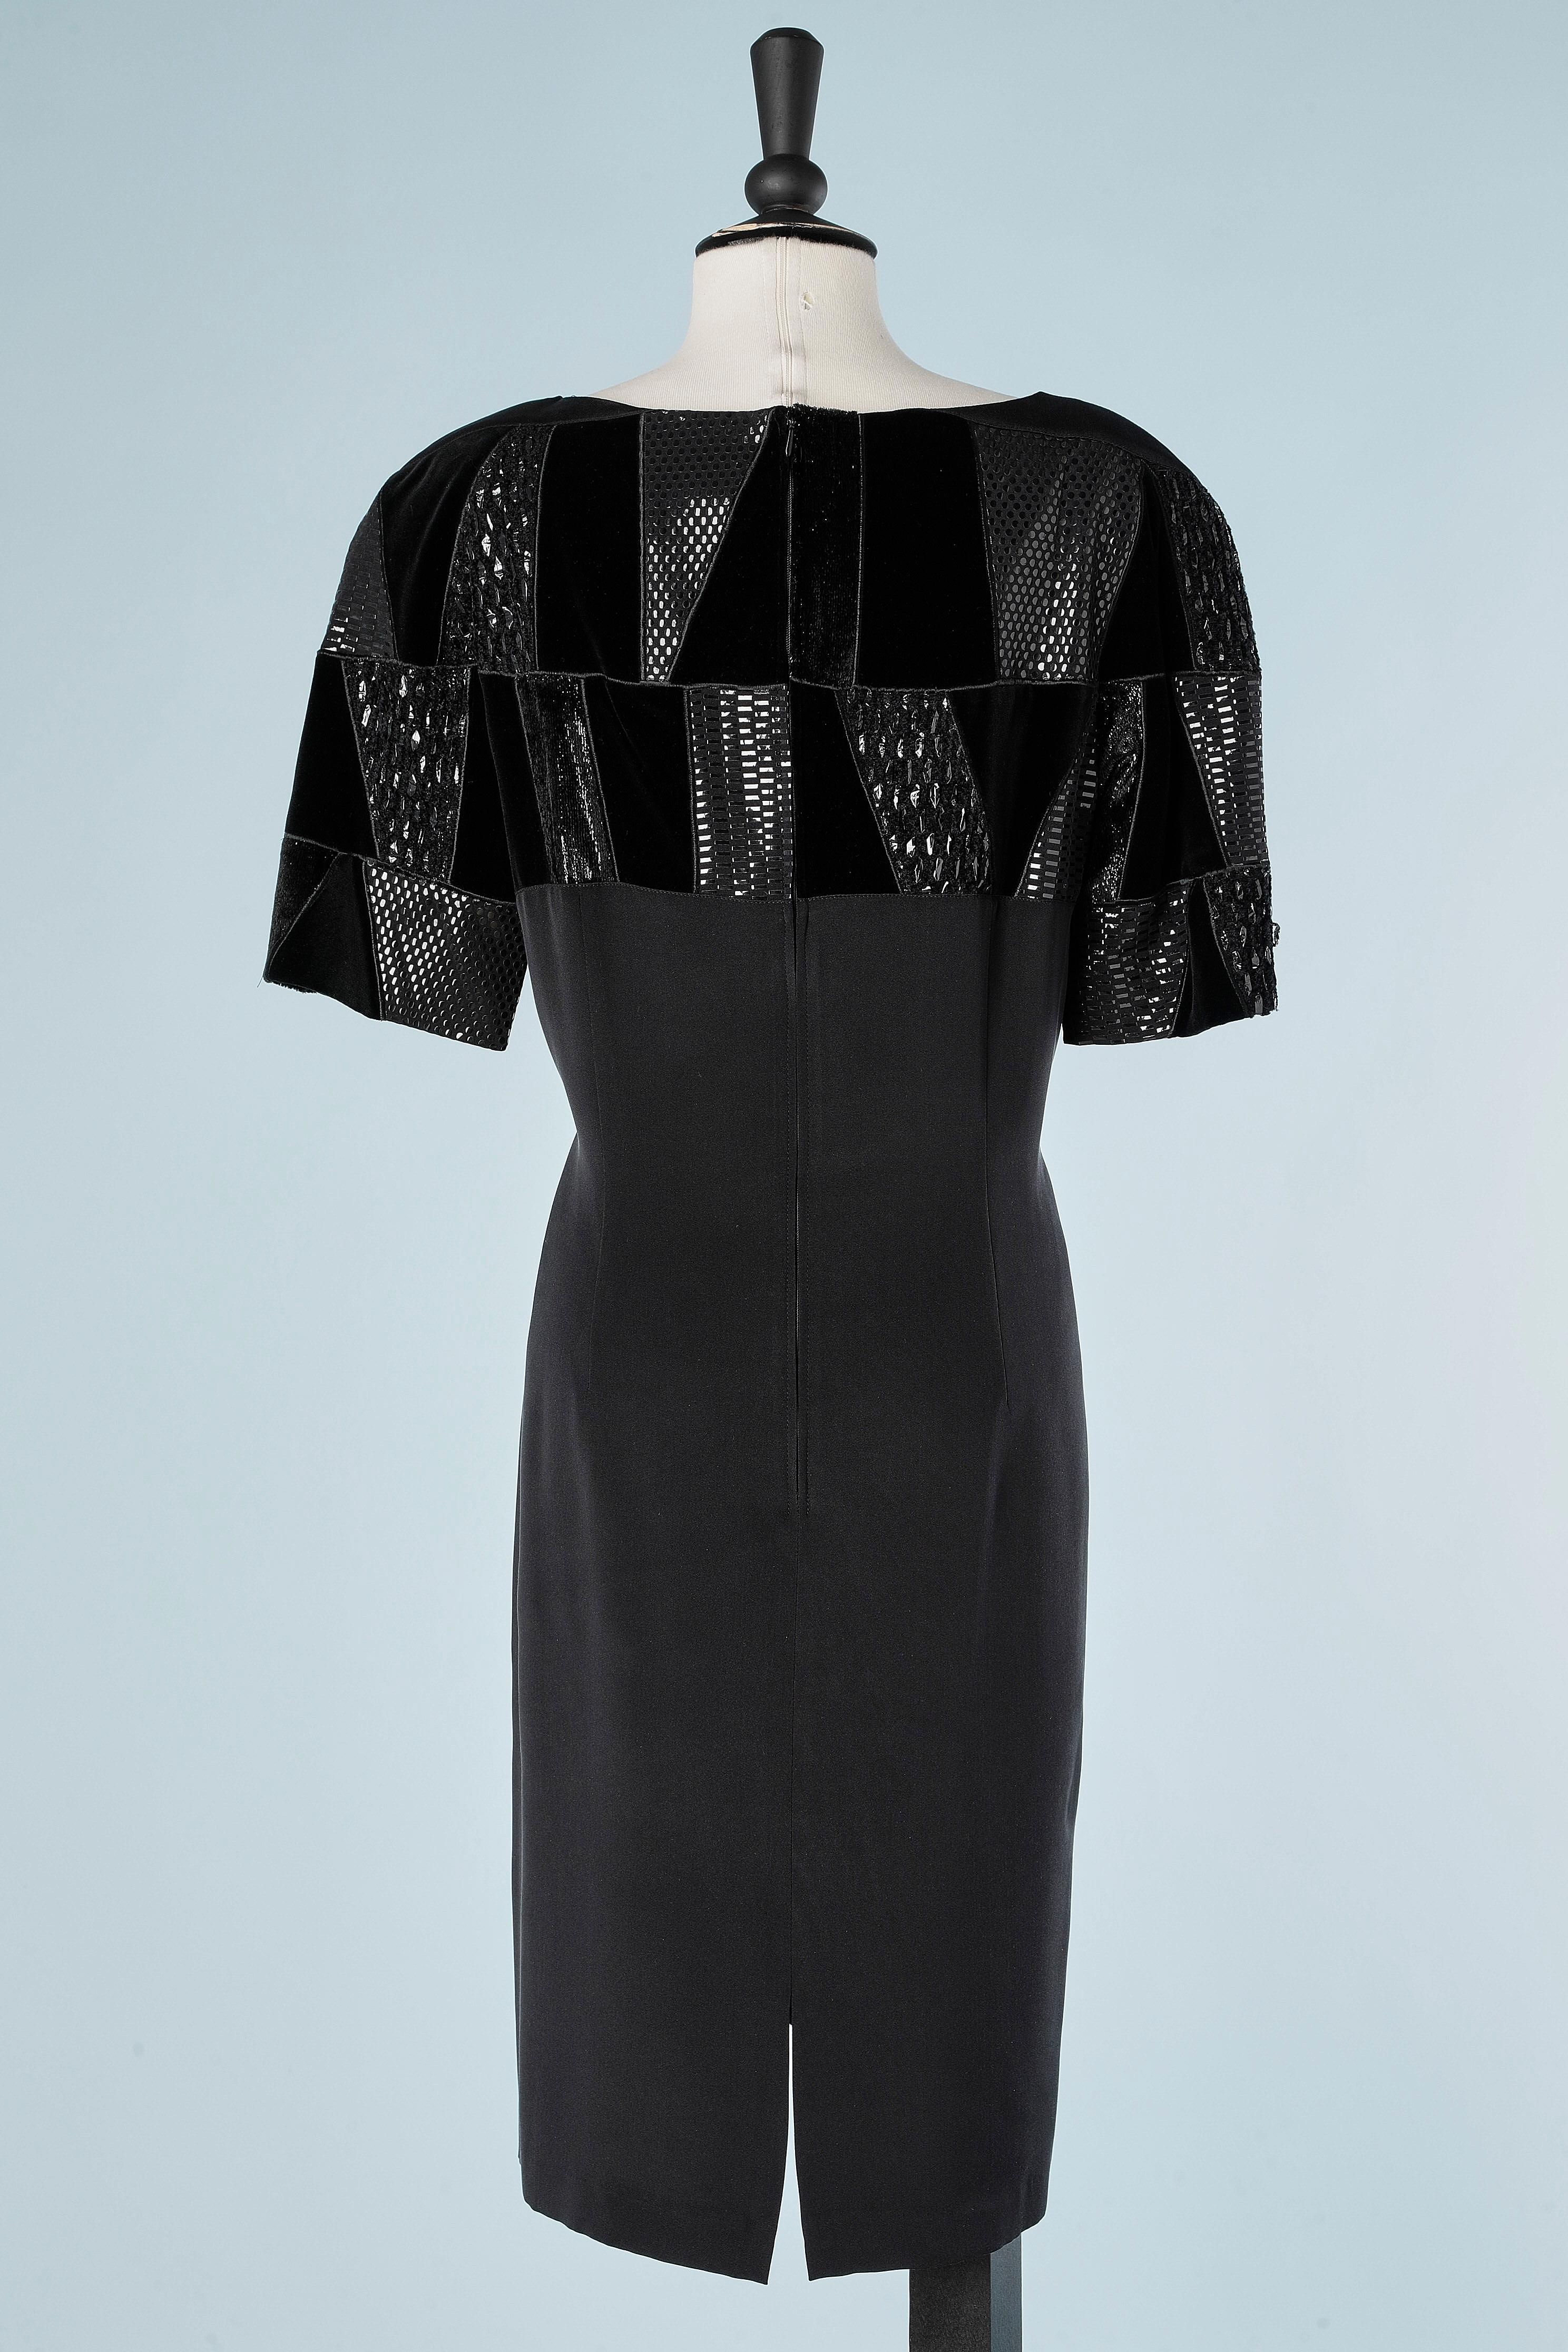 Black silk dress with black fabric patchwork appliqué on the top Louis Féraud  For Sale 2